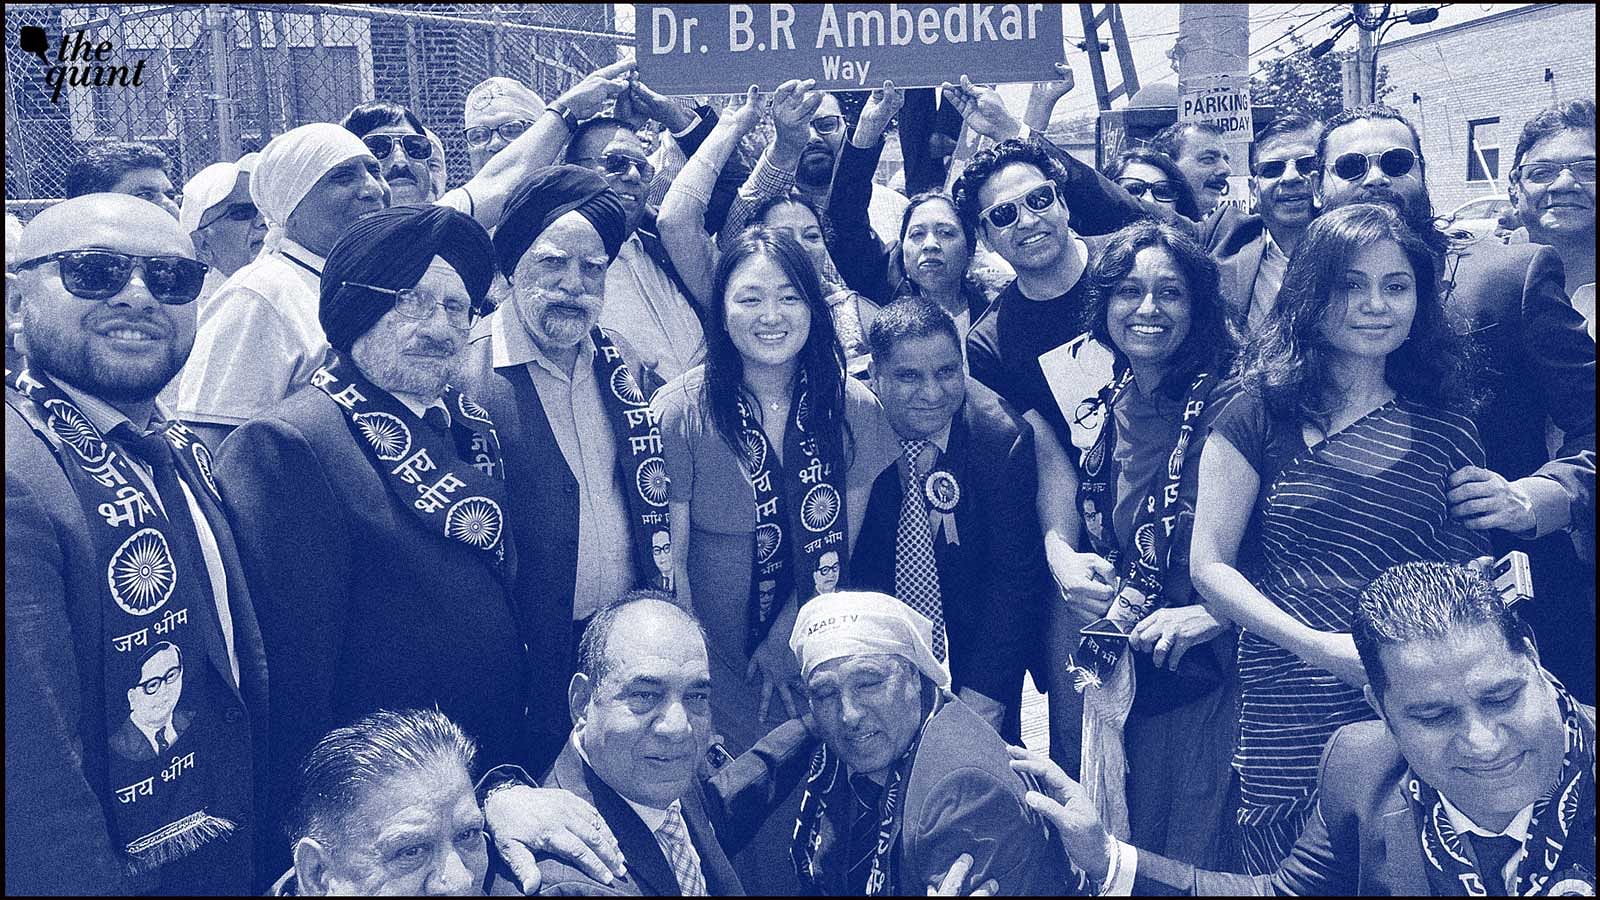 <div class="paragraphs"><p>A street plate bearing the words 'Dr. B.R Ambedkar Way' was put up at the intersection of Broadway and 61st Street.</p></div>